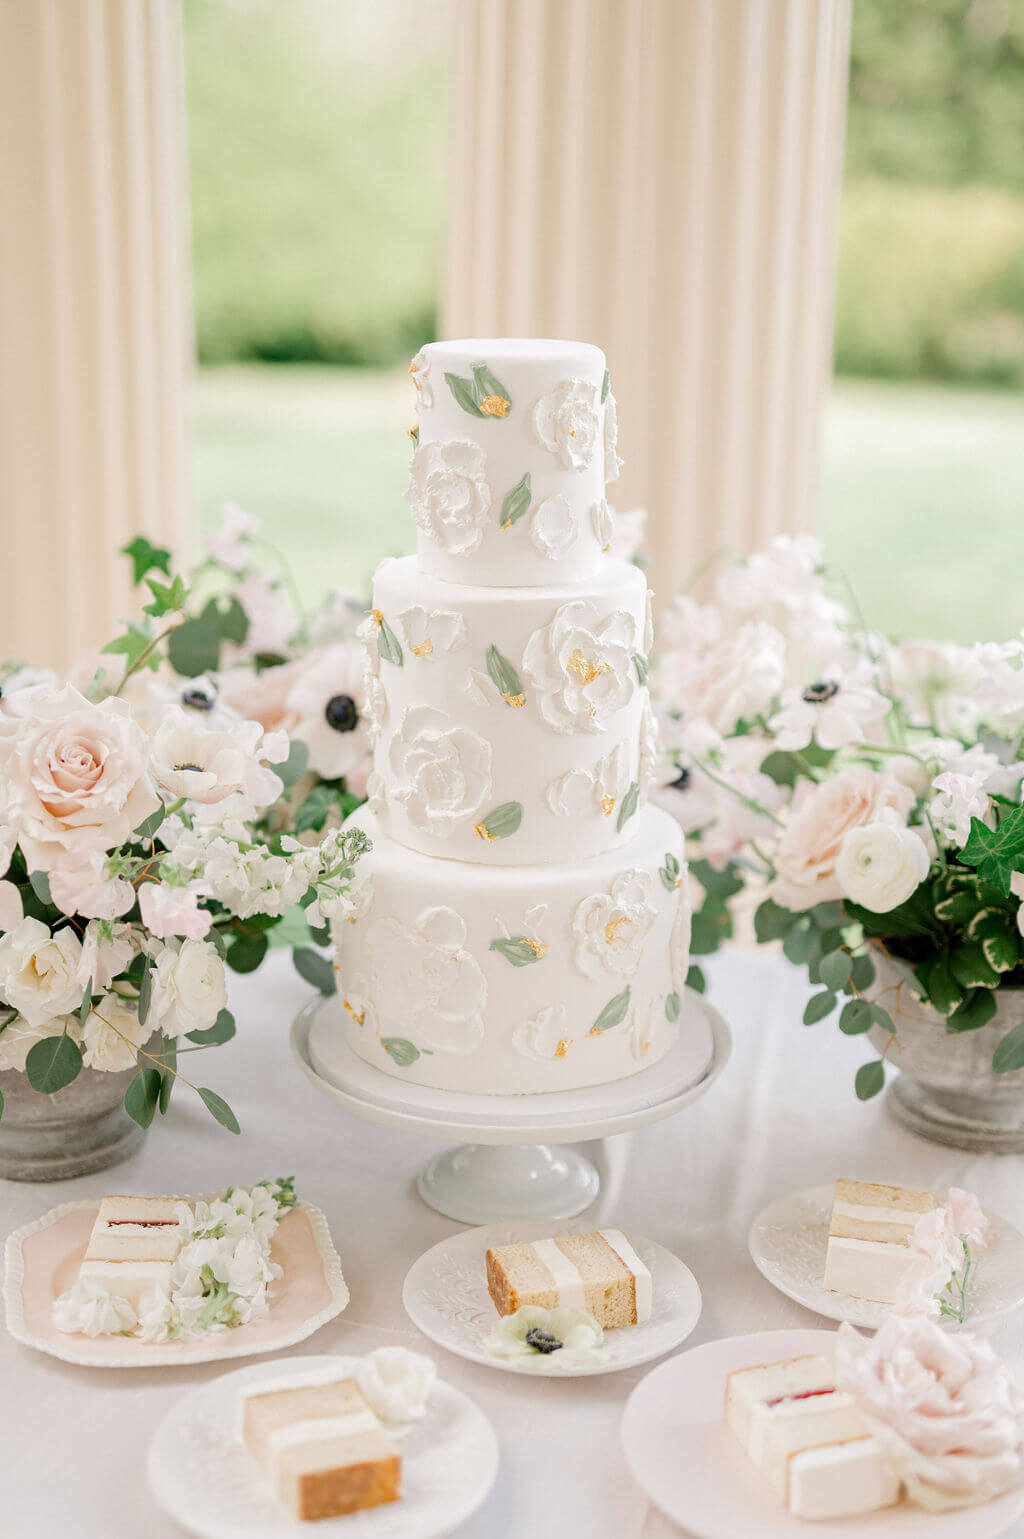 Cake by Sweets by Amanda with white flowers and golden details